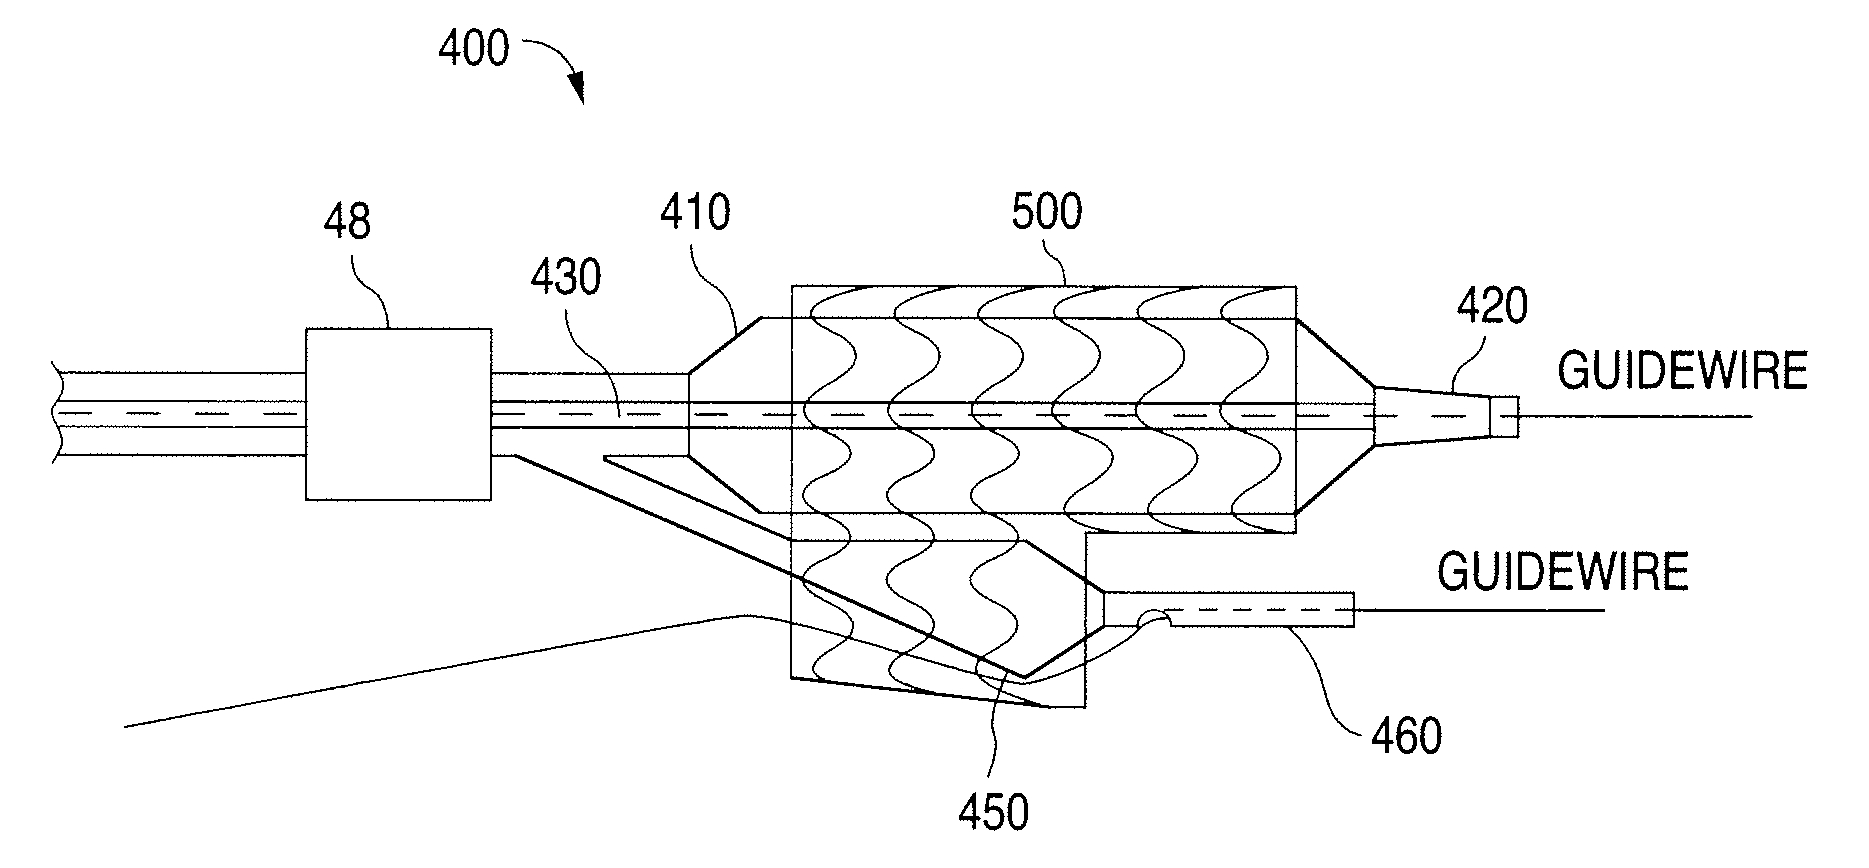 Bifurcation stent delivery catheter and method